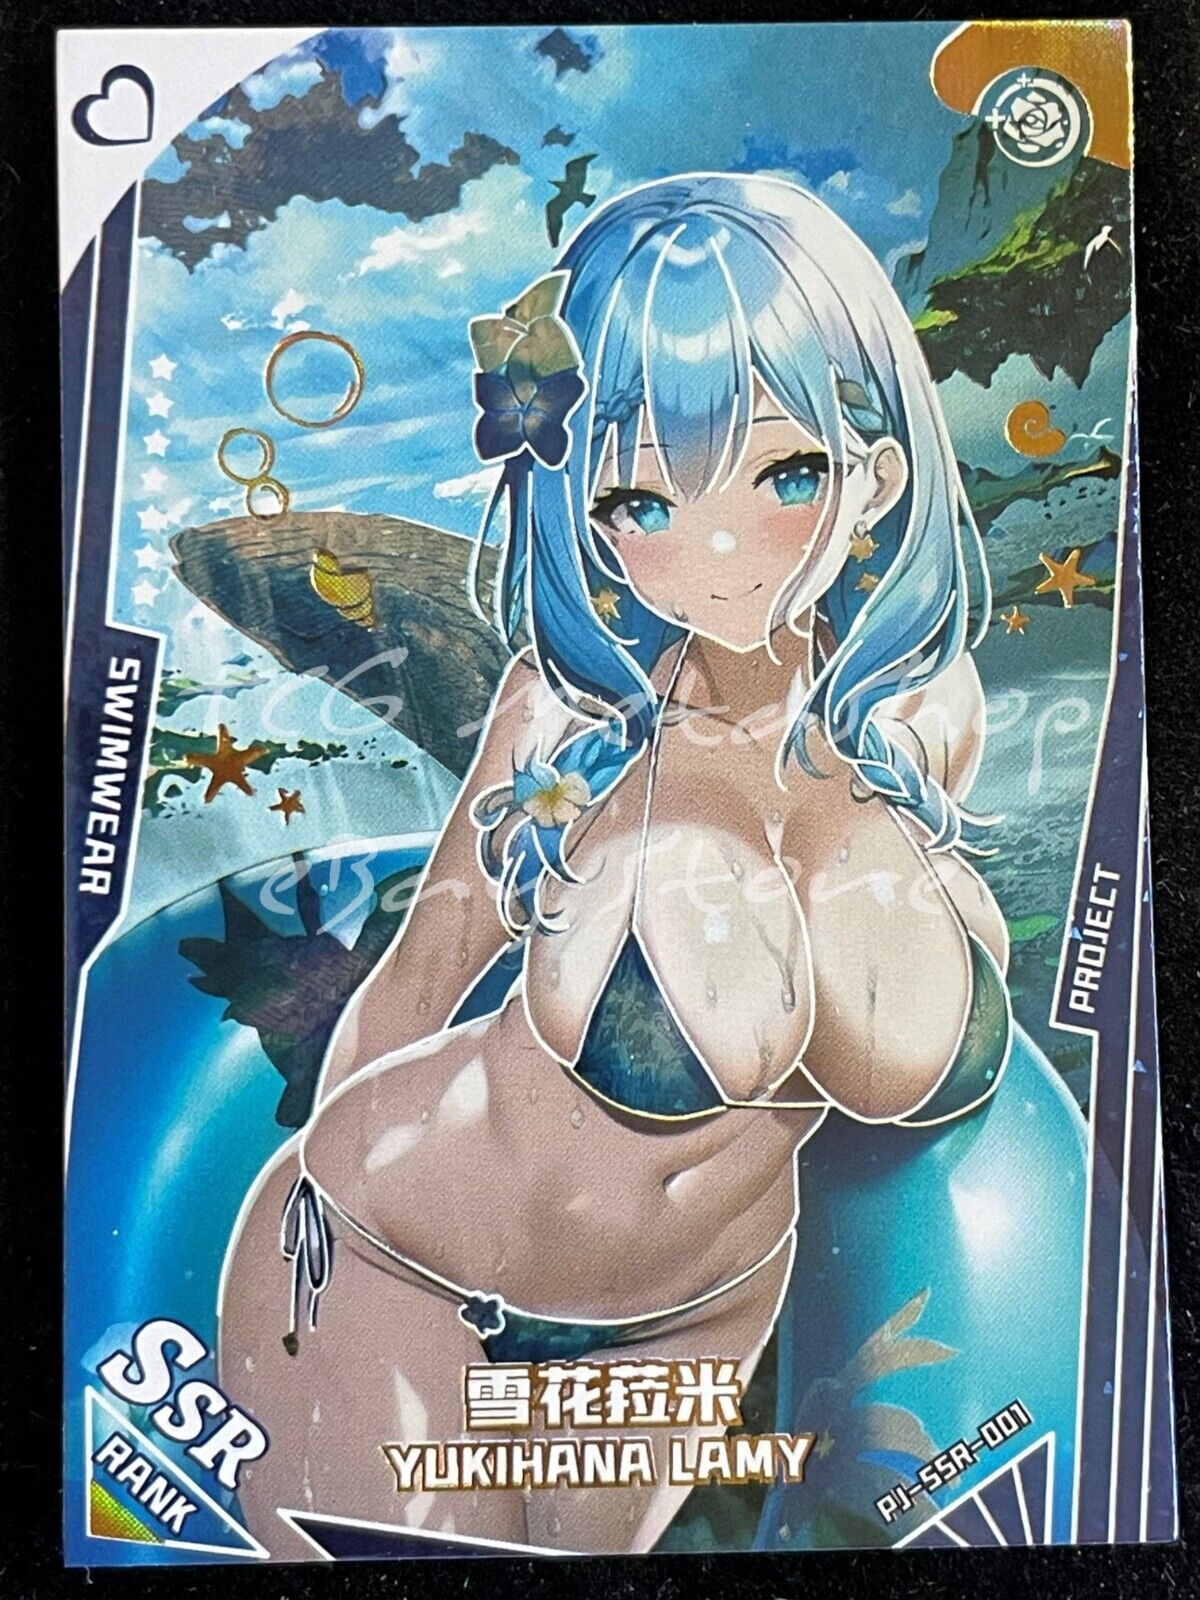 🔥 Project Maiden [Pick your SSR UR WKR Card] Waifu Anime THICK 🔥